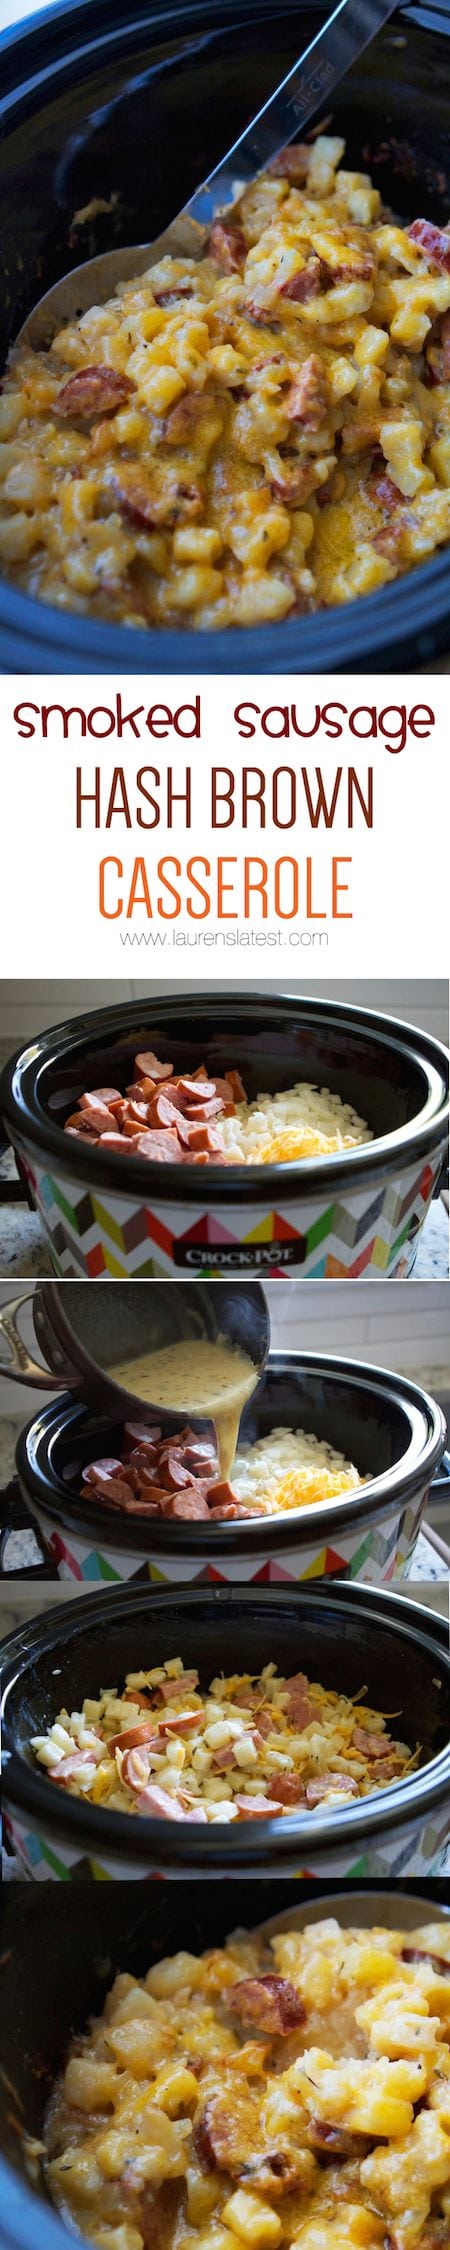 Best Slow Cooker Recipes - Smoked Sausage Hash Brown Casserole